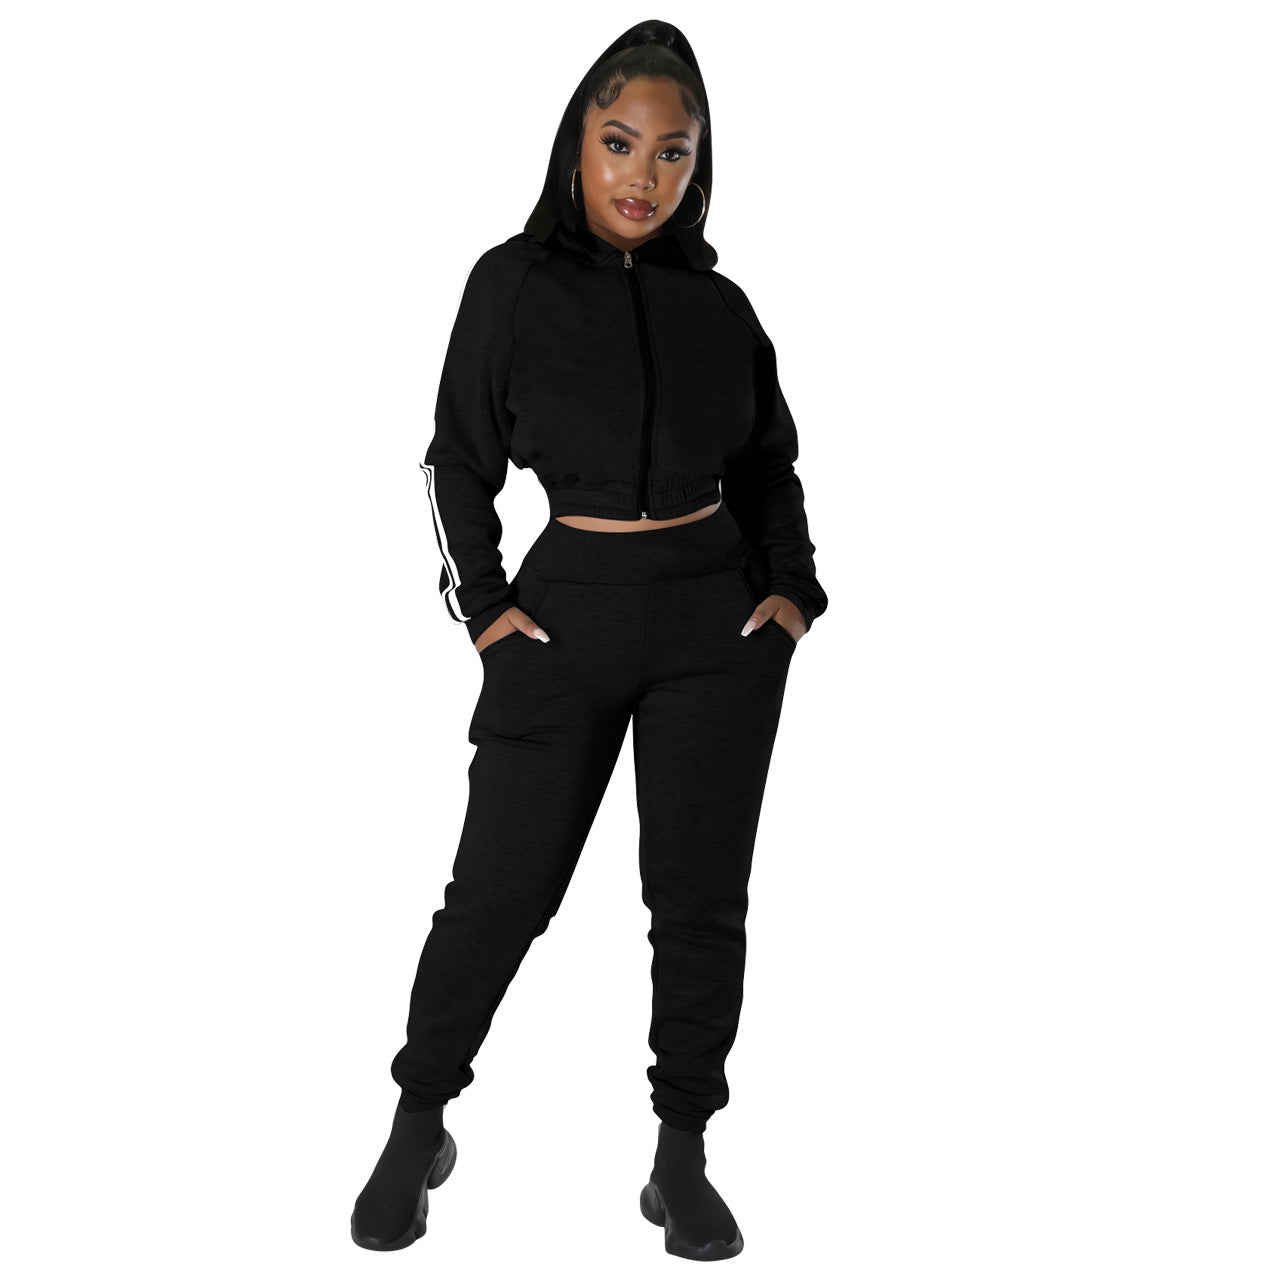 Women's Fashion Casual Hooded Sweater Suit